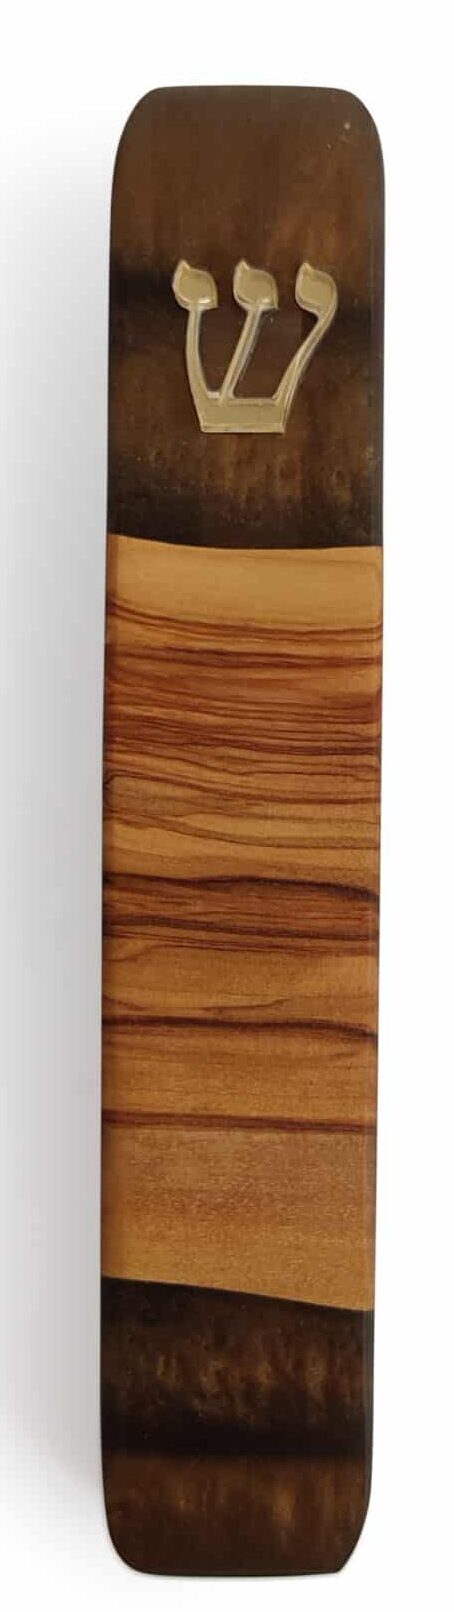 Brown Epoxy and Olive Wood Mezuzah Case